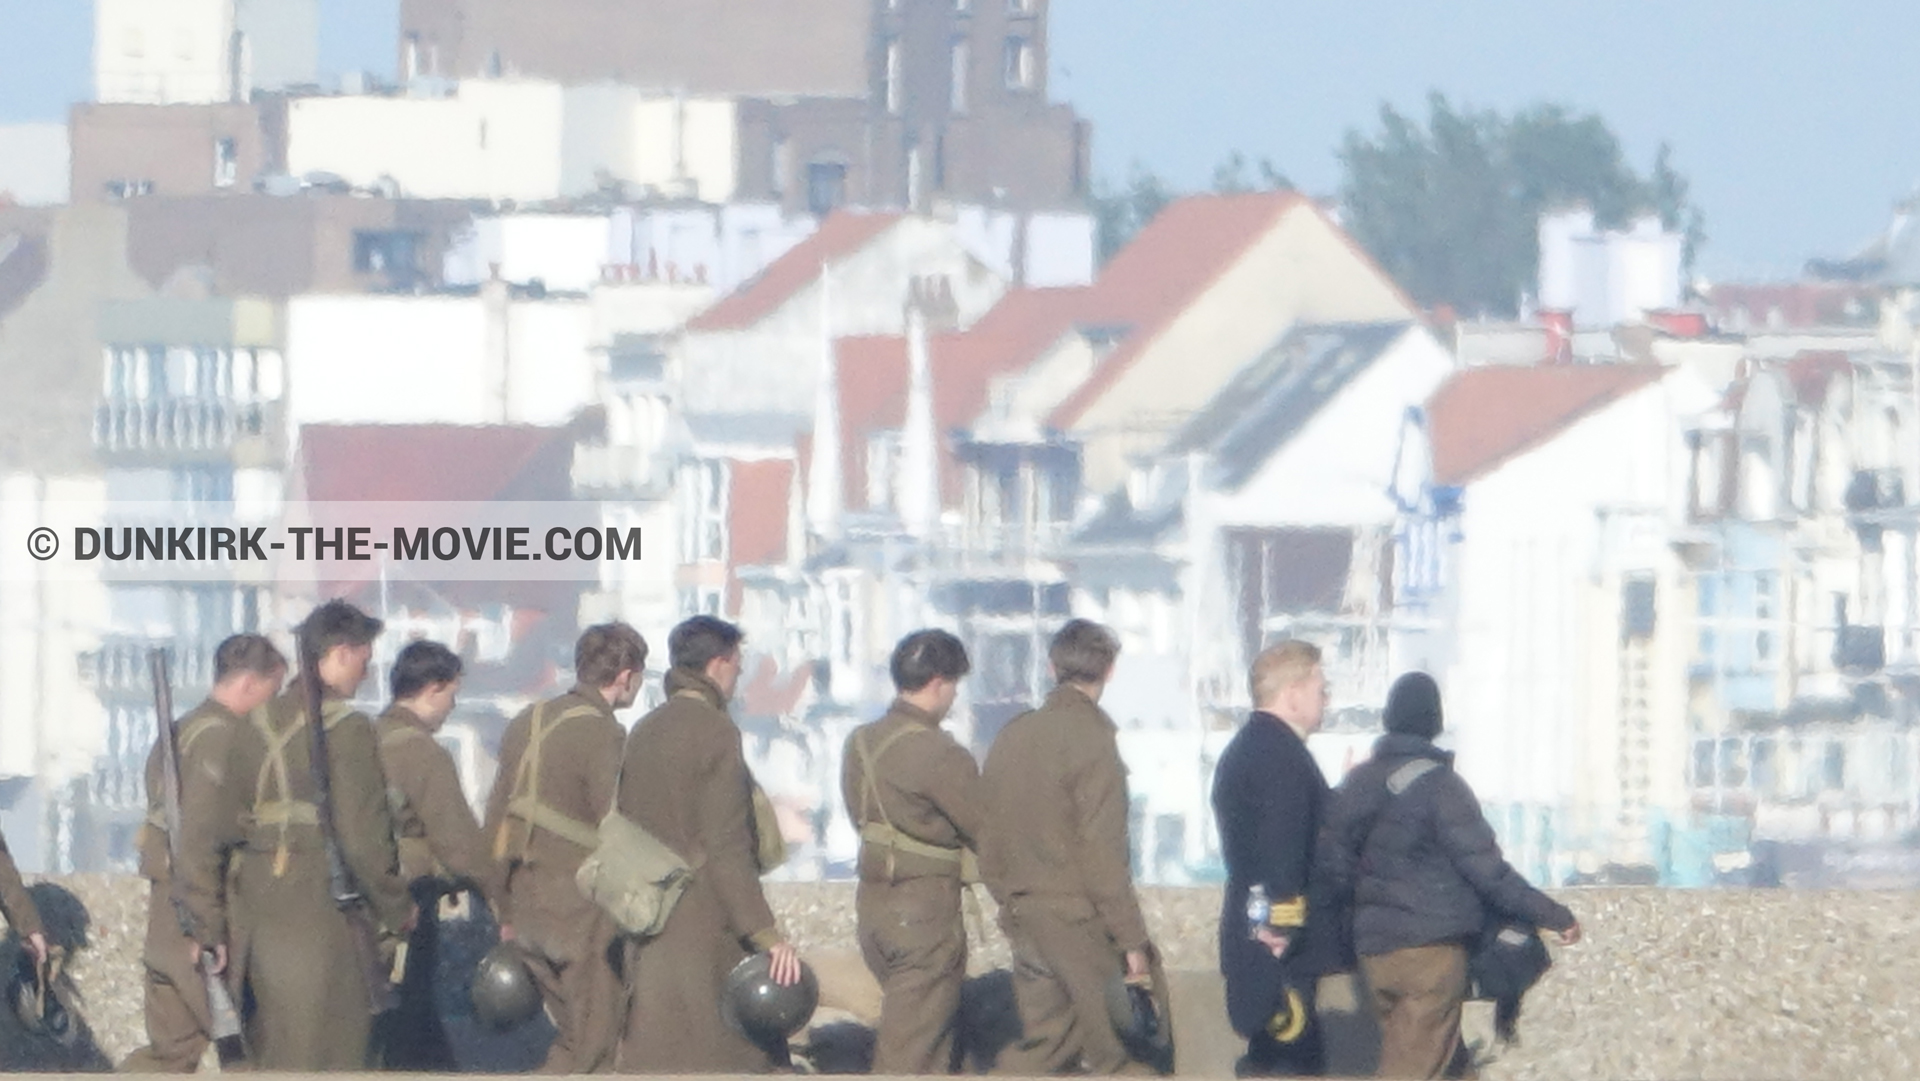 Picture with supernumeraries, EST pier, Kenneth Branagh, Malo les Bains,  from behind the scene of the Dunkirk movie by Nolan